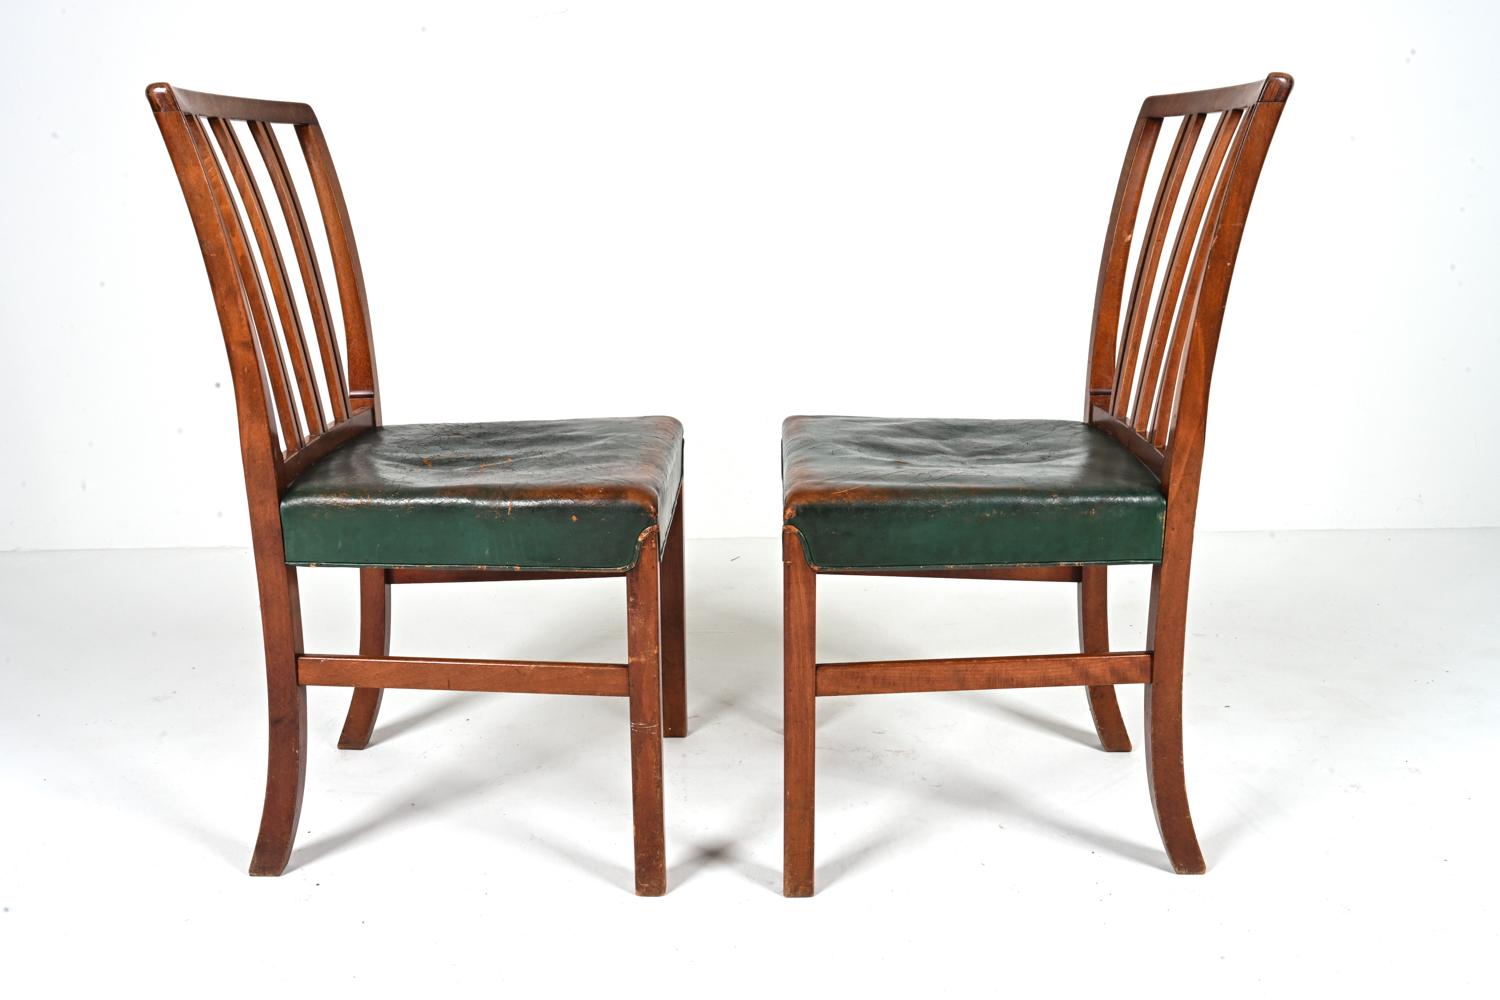 '12' Rare Model 1675B Dining Chairs by Ole Wanscher Fritz Hansen, c. 1940's For Sale 12